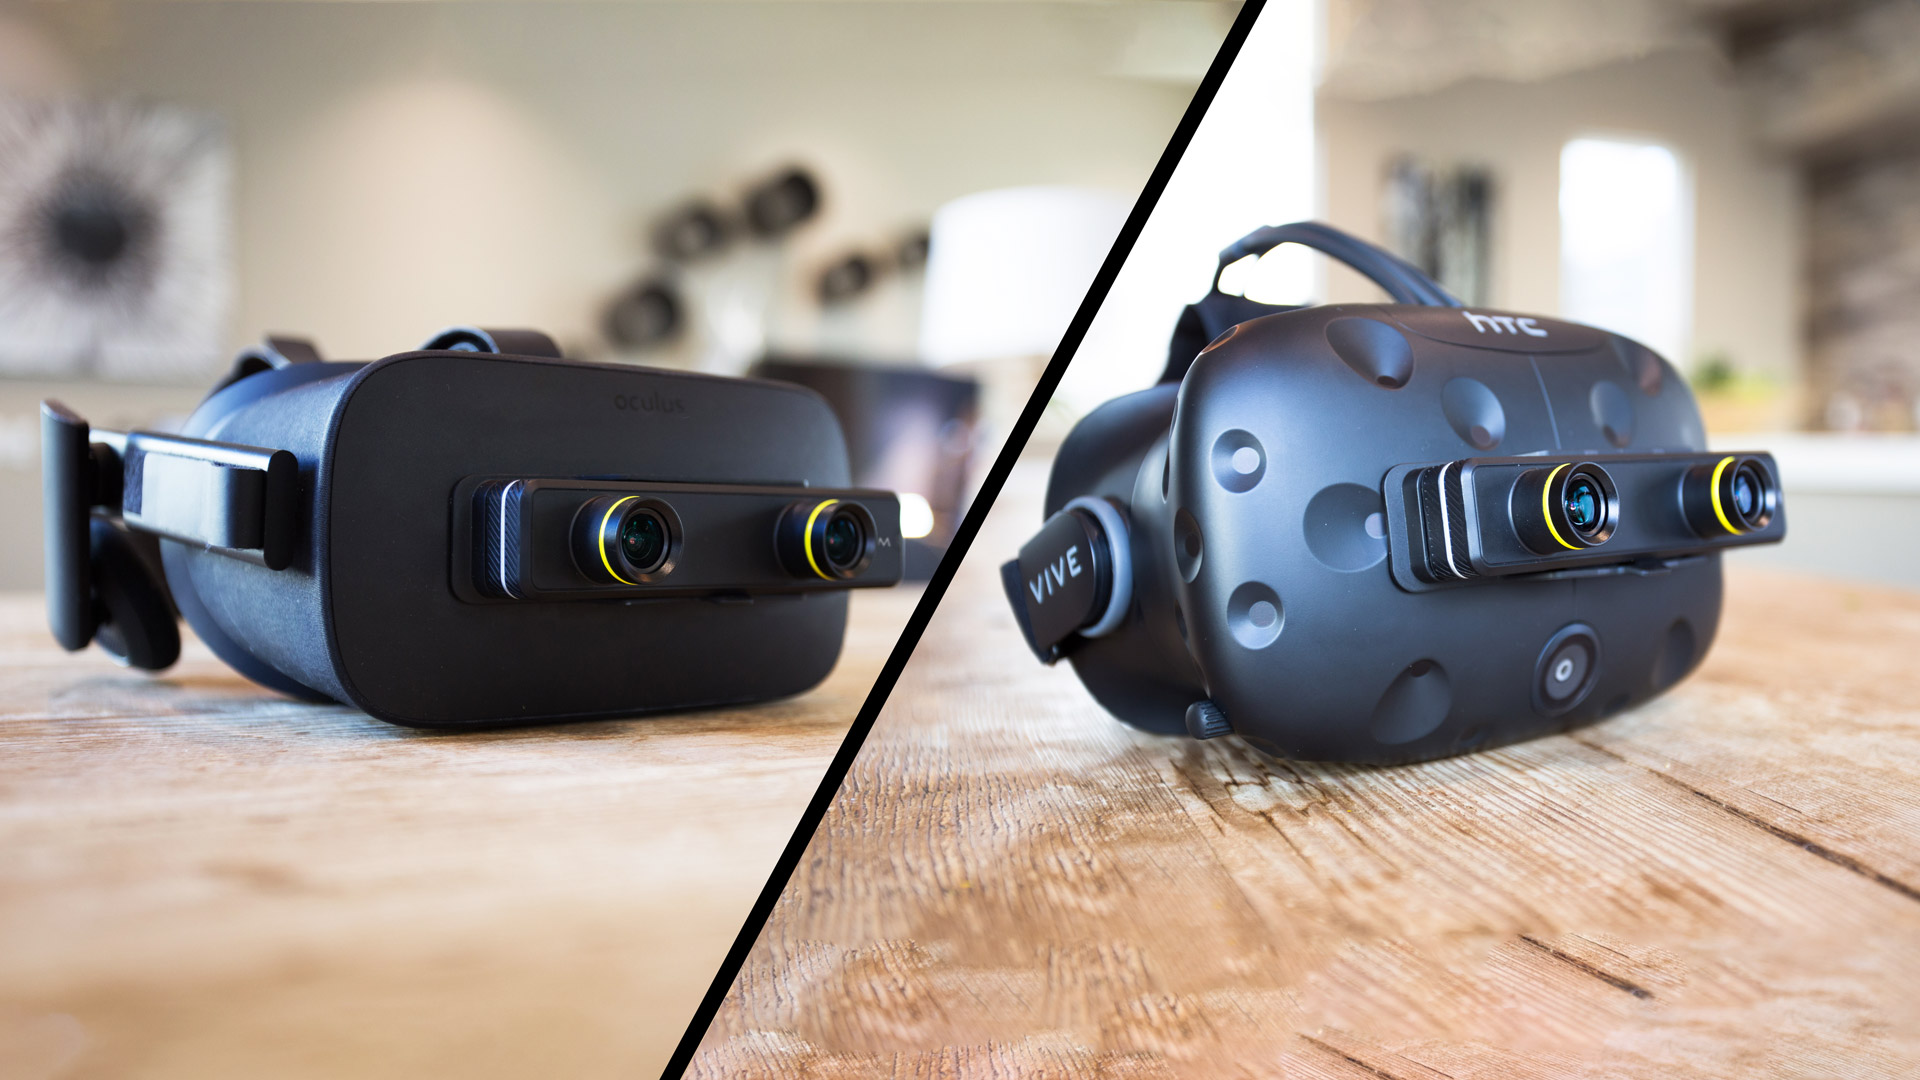 Mini Turns and Vive into an AR Headset From the